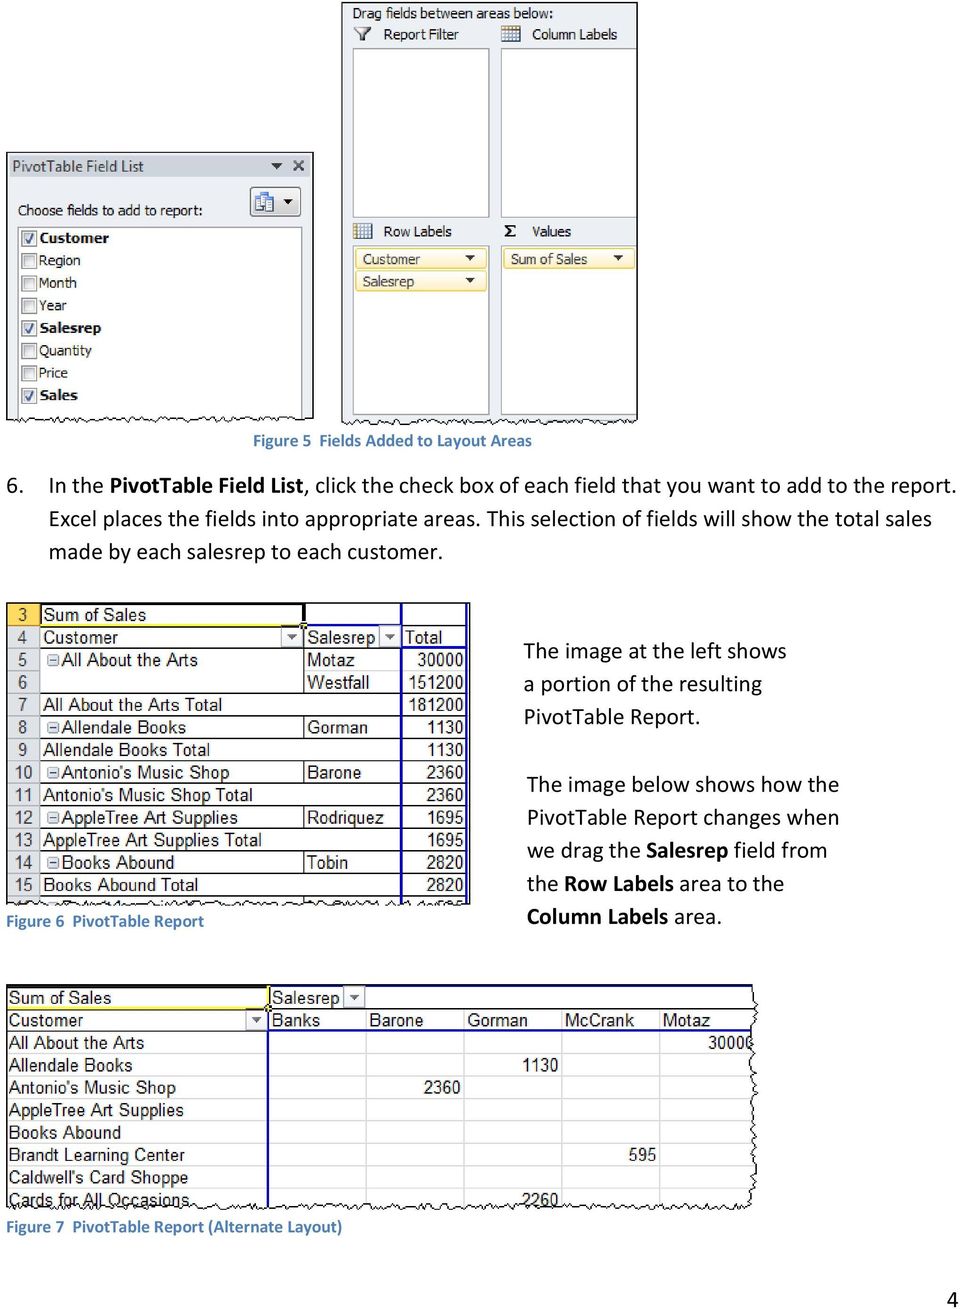 The image at the left shows a portion of the resulting PivotTable Report.